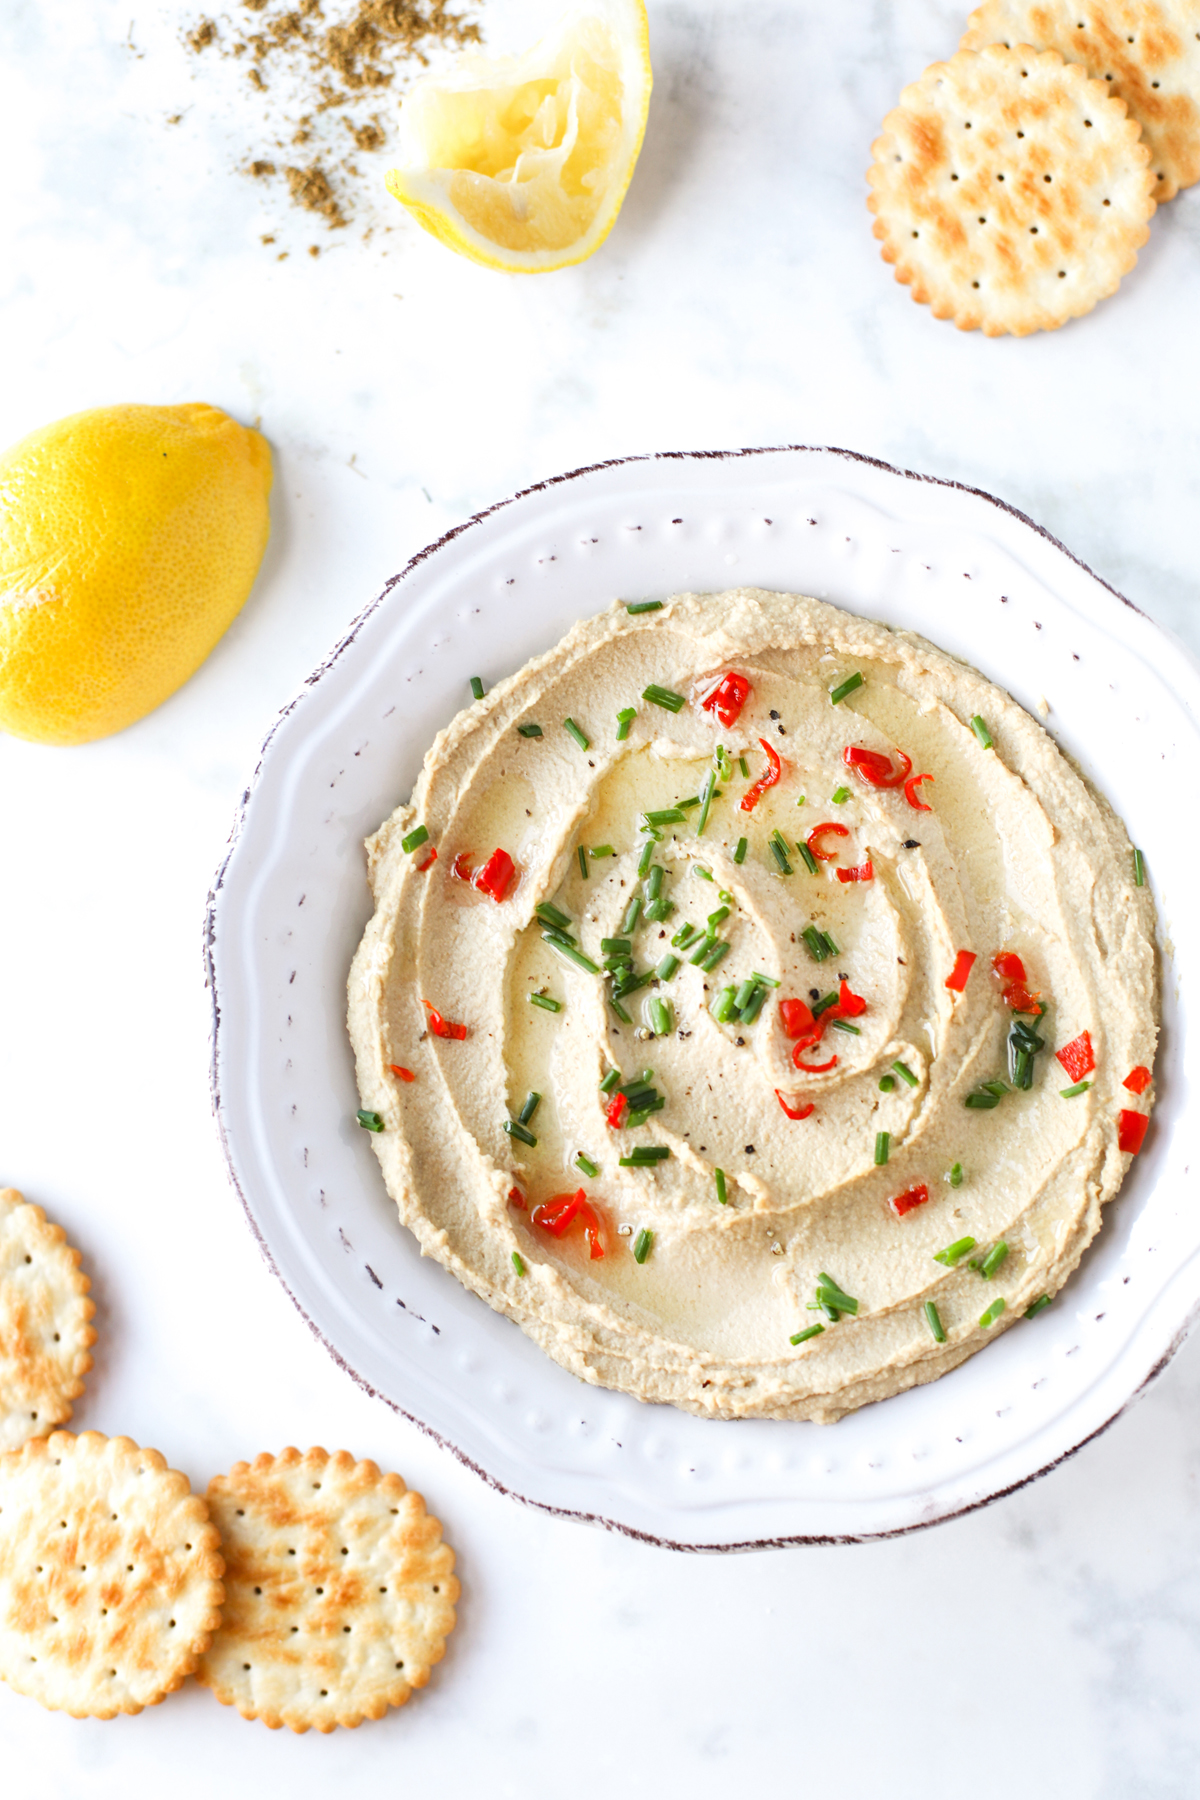 Hummus sprinkled with herbs and chilli